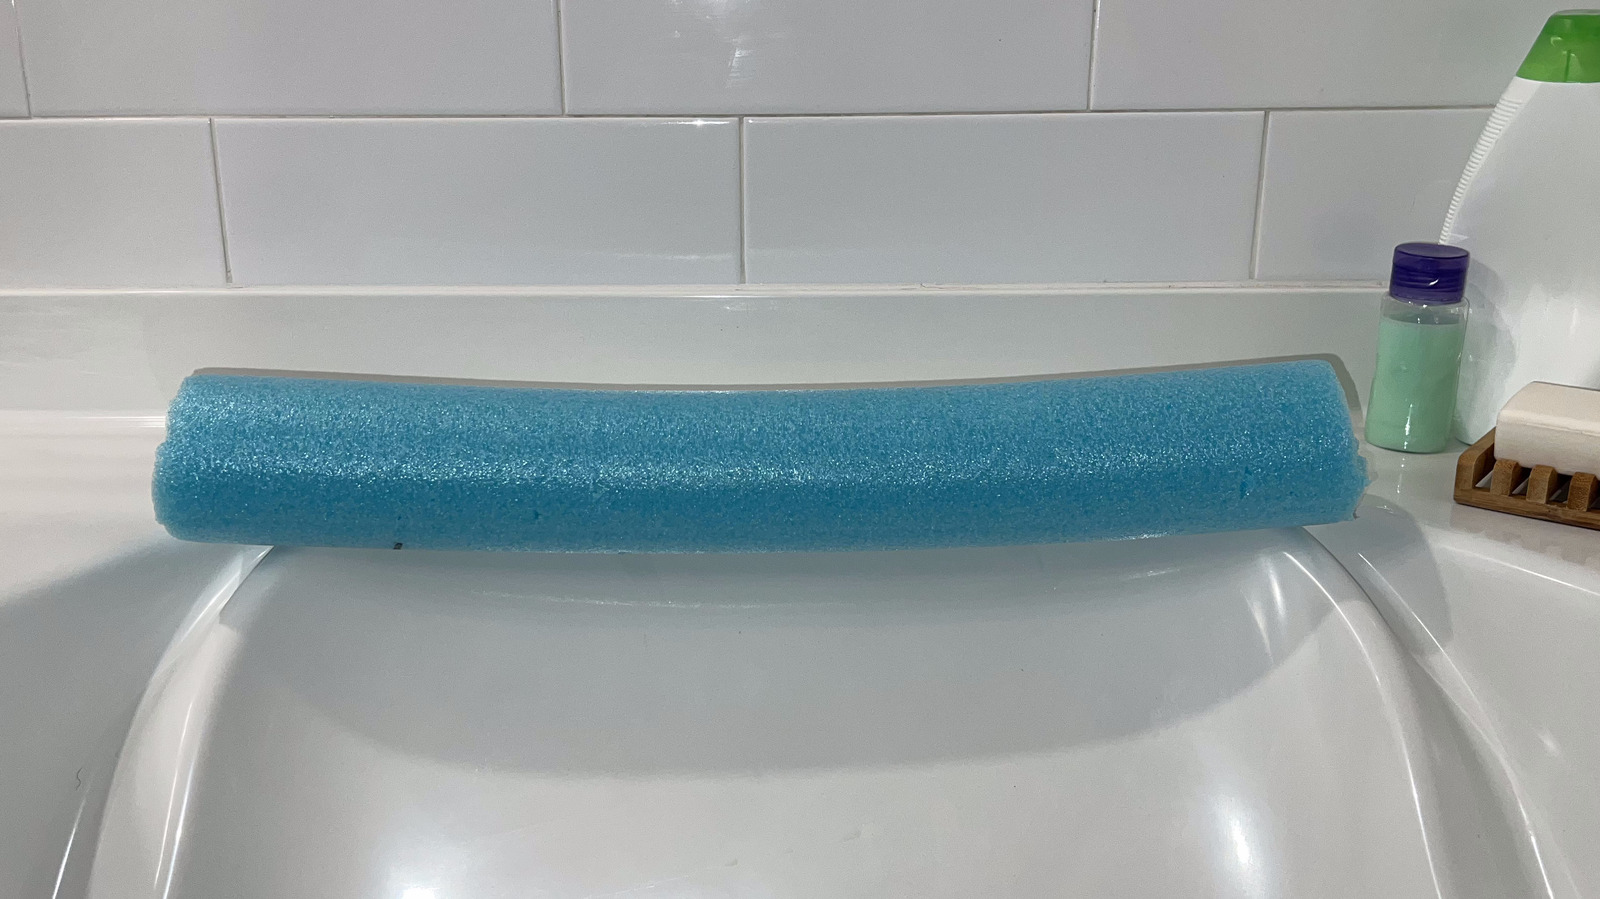 https://www.housedigest.com/img/gallery/we-turned-a-pool-noodle-into-a-diy-bathtub-pillow-and-our-necks-thanked-us/l-intro-1685033925.jpg